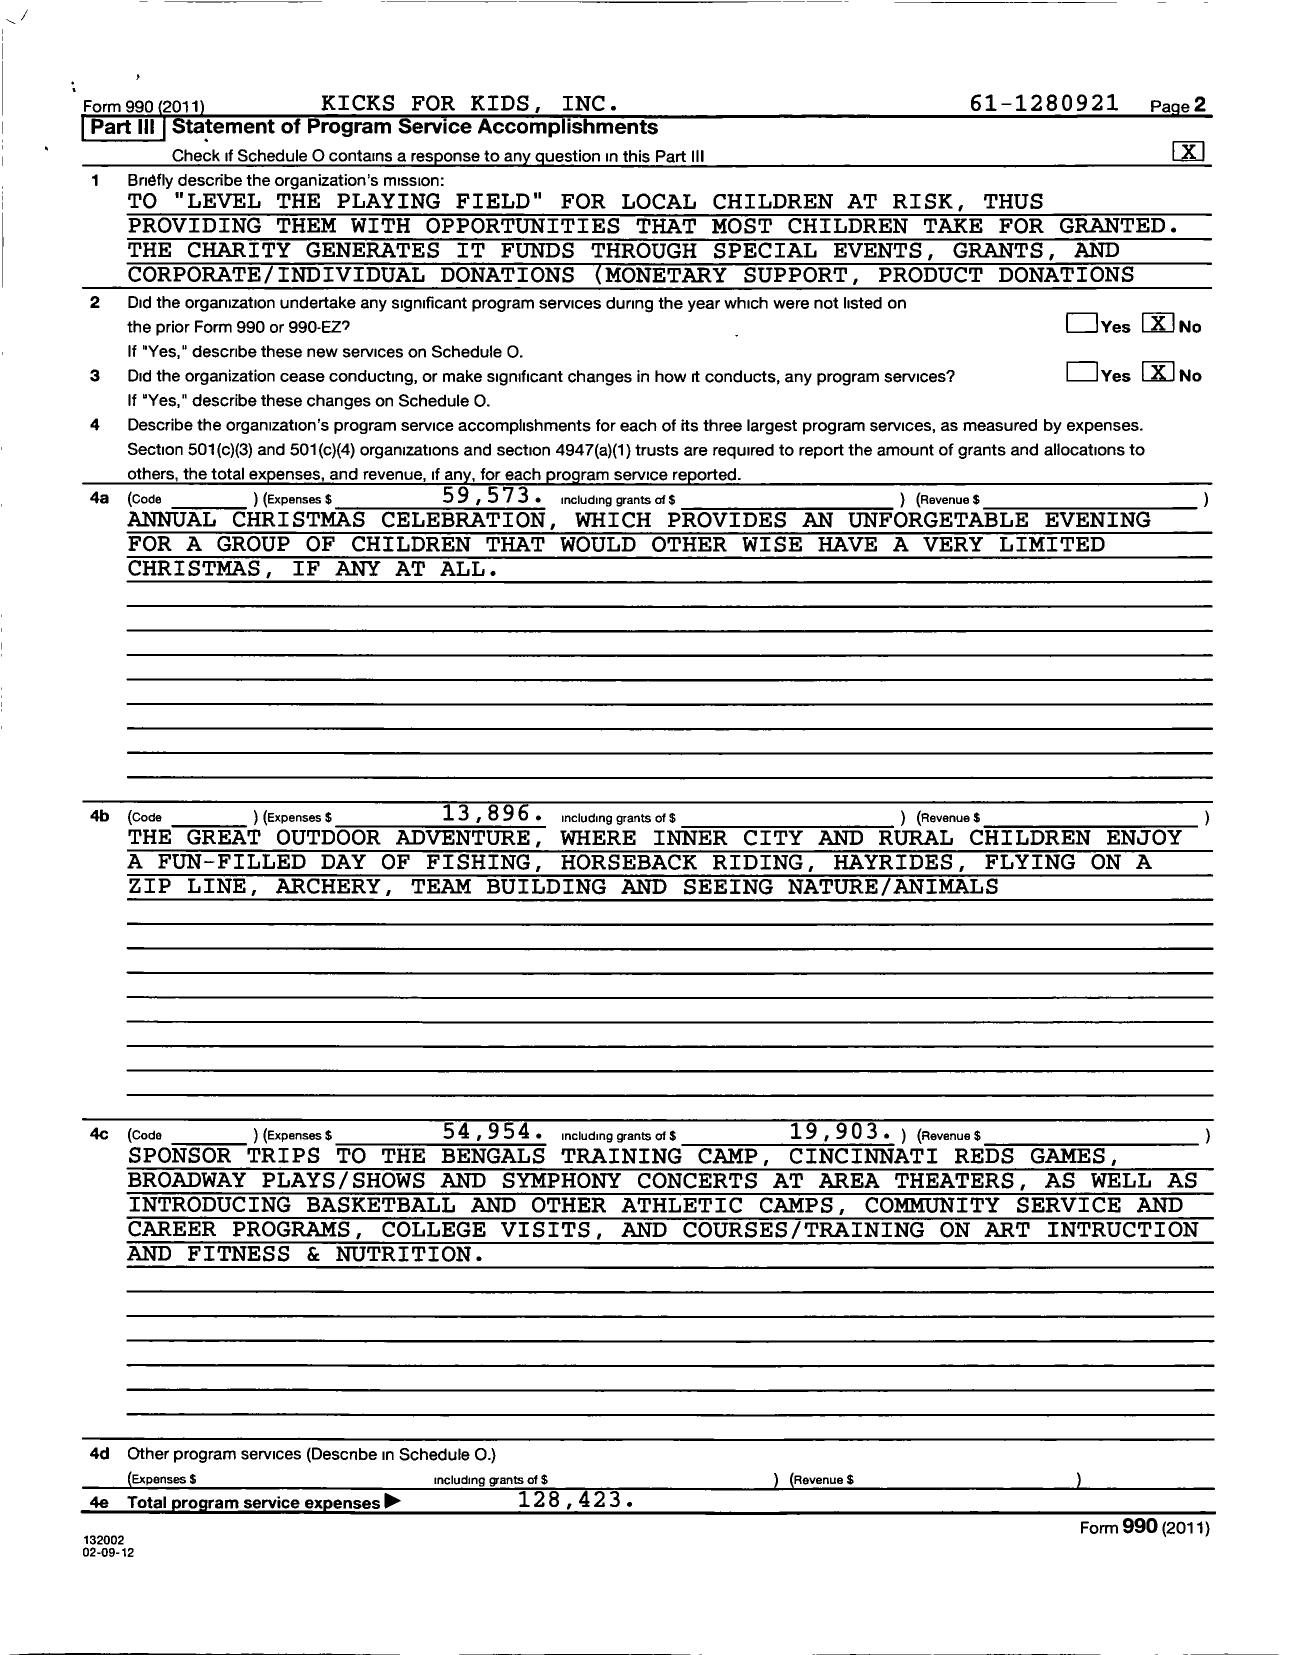 Image of first page of 2011 Form 990 for Kicks for Kids